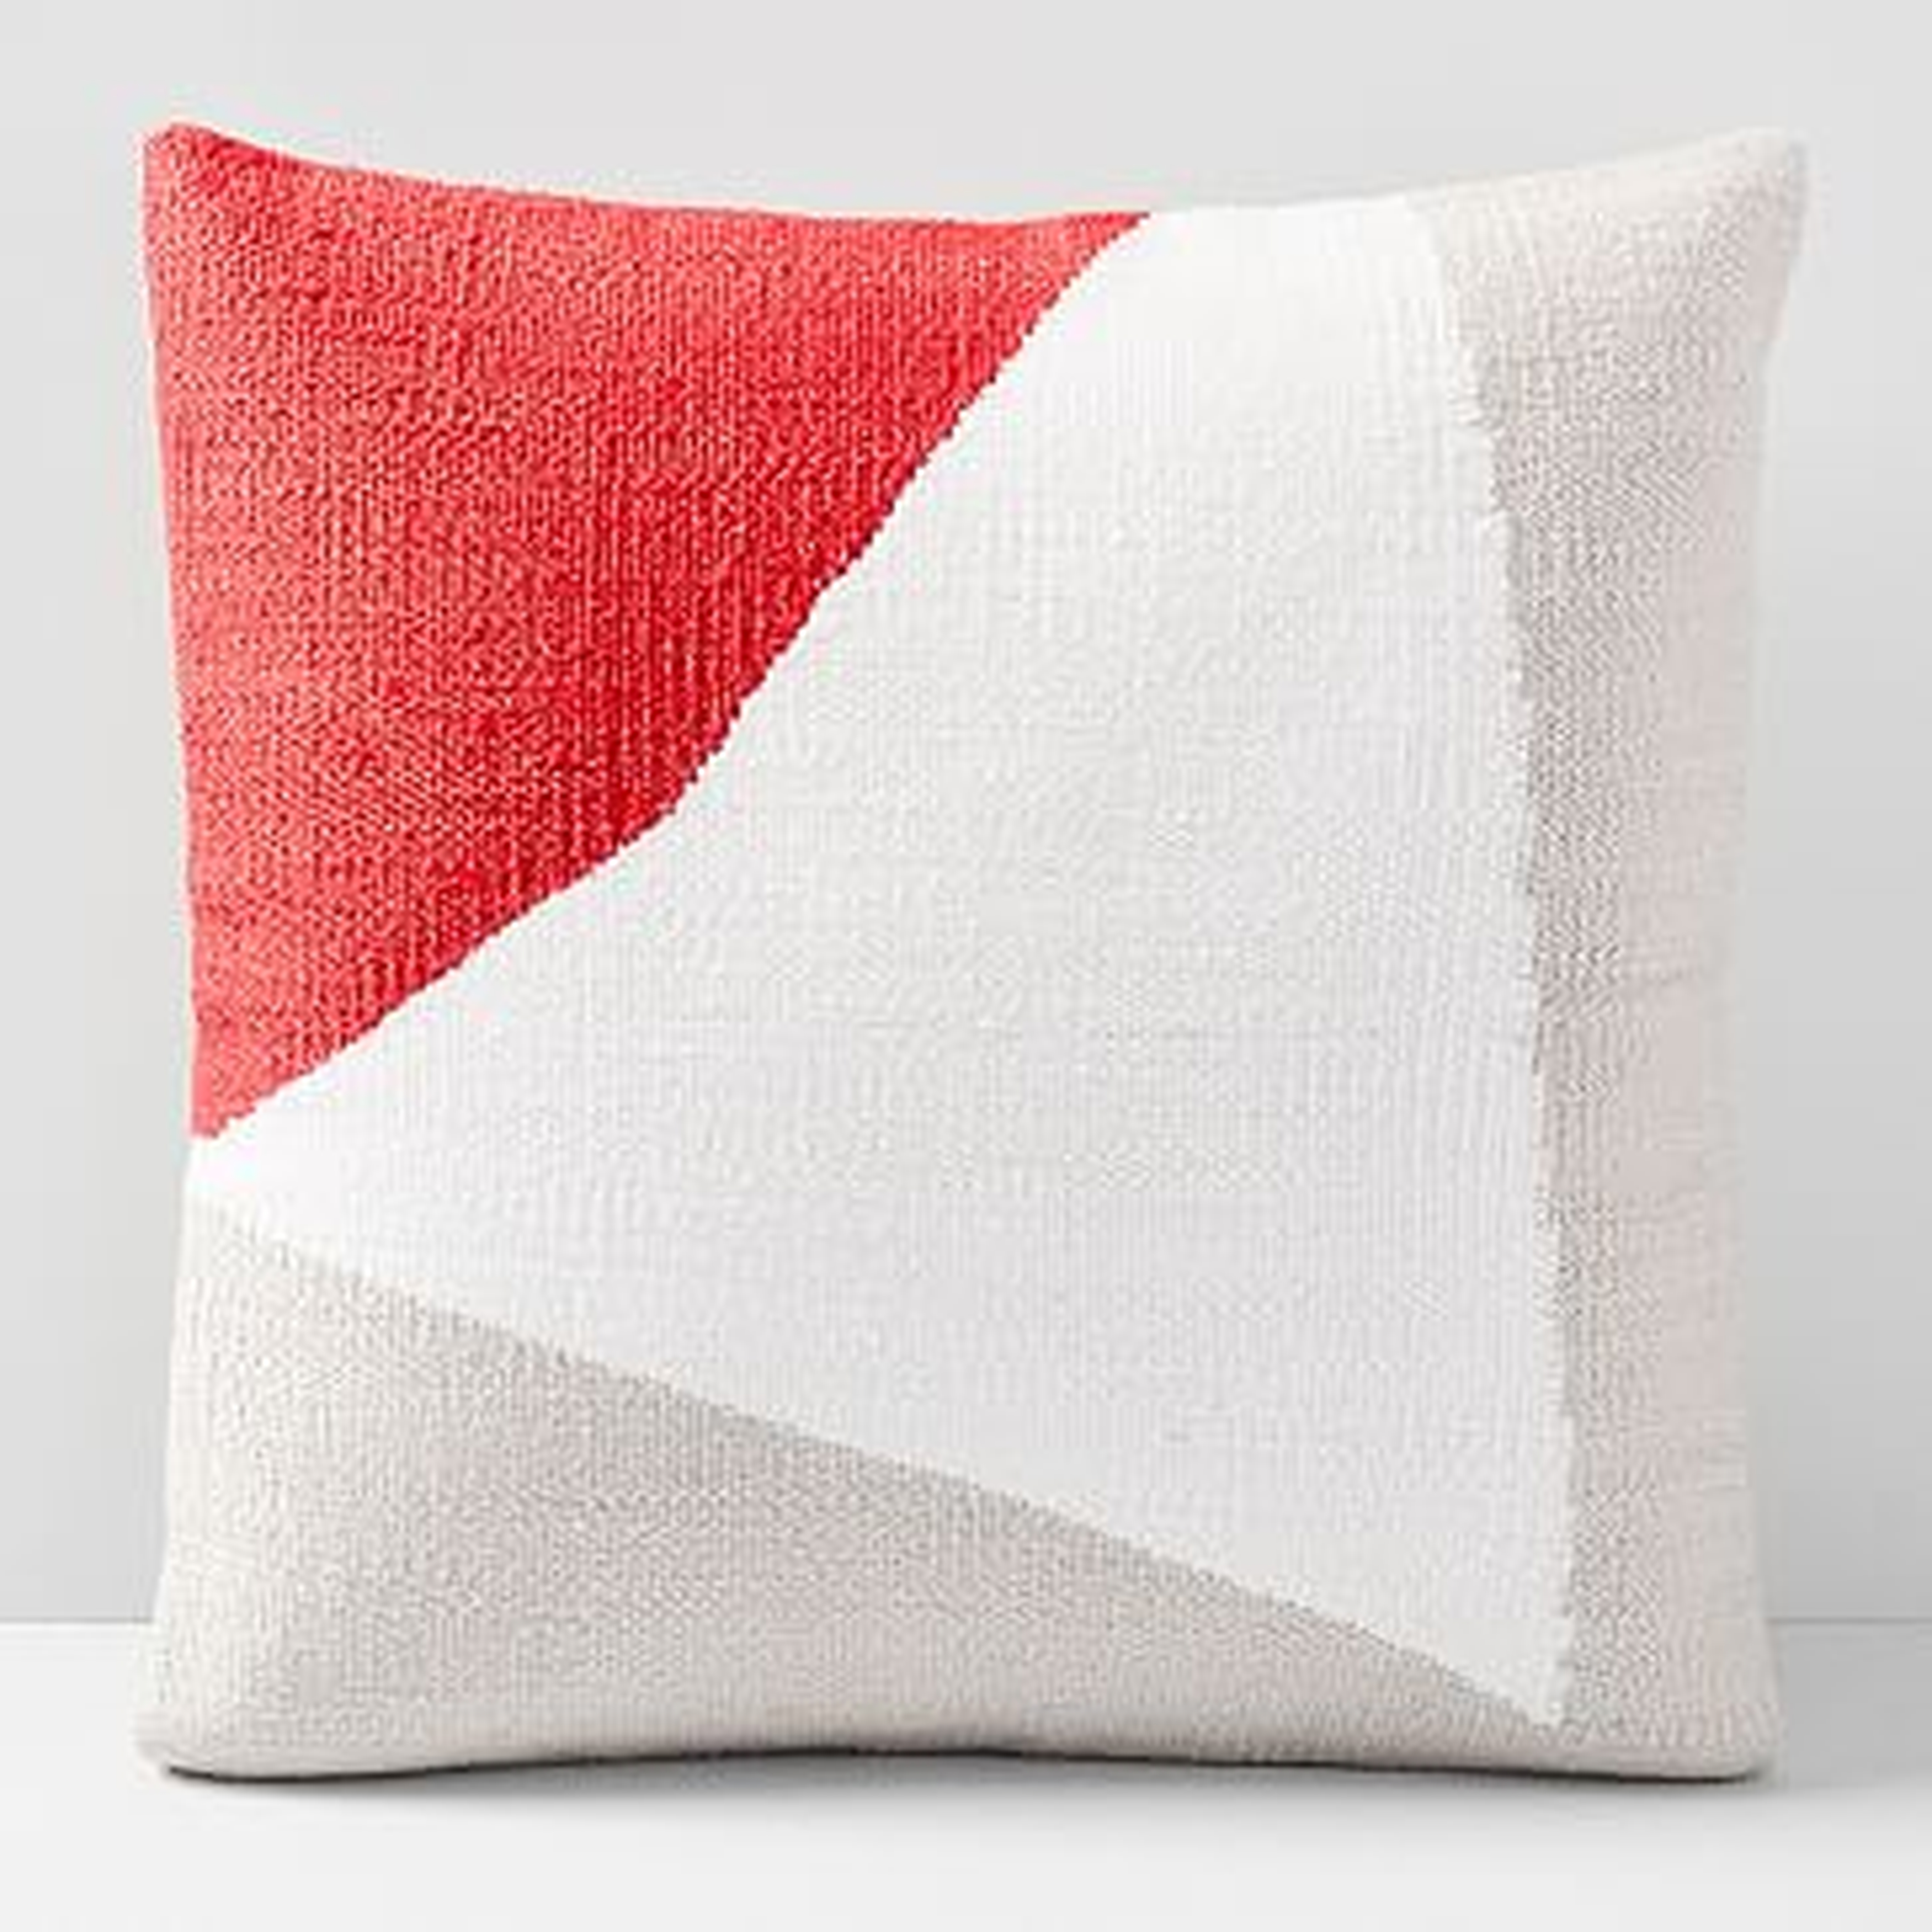 Amplified Arrow Pillow Cover, So Red, 20"x20" - West Elm